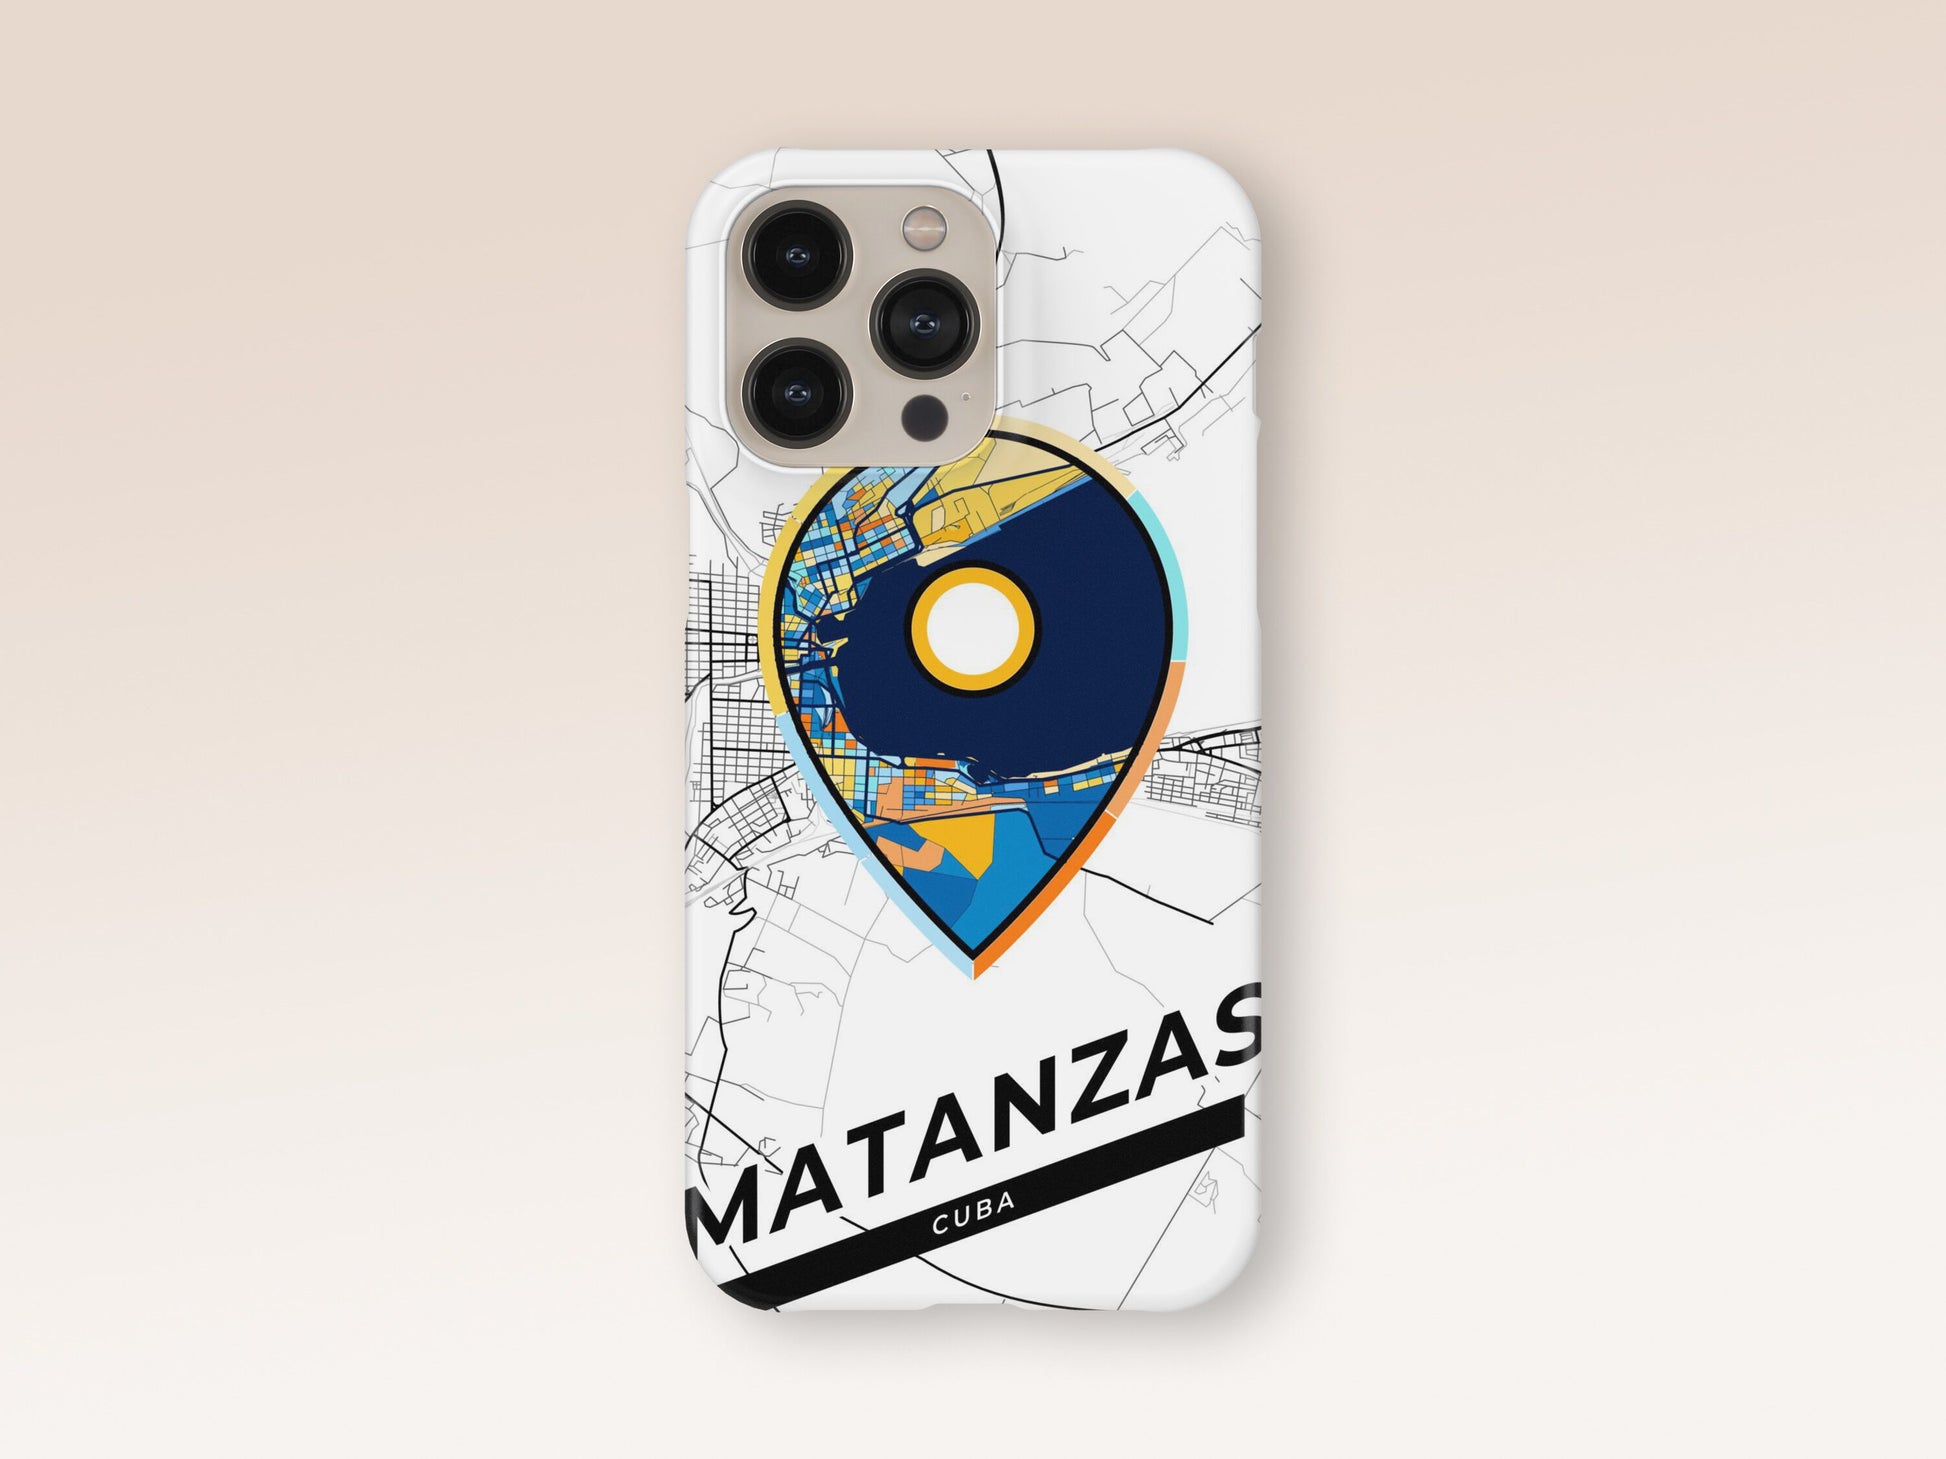 Matanzas Cuba slim phone case with colorful icon. Birthday, wedding or housewarming gift. Couple match cases. 1